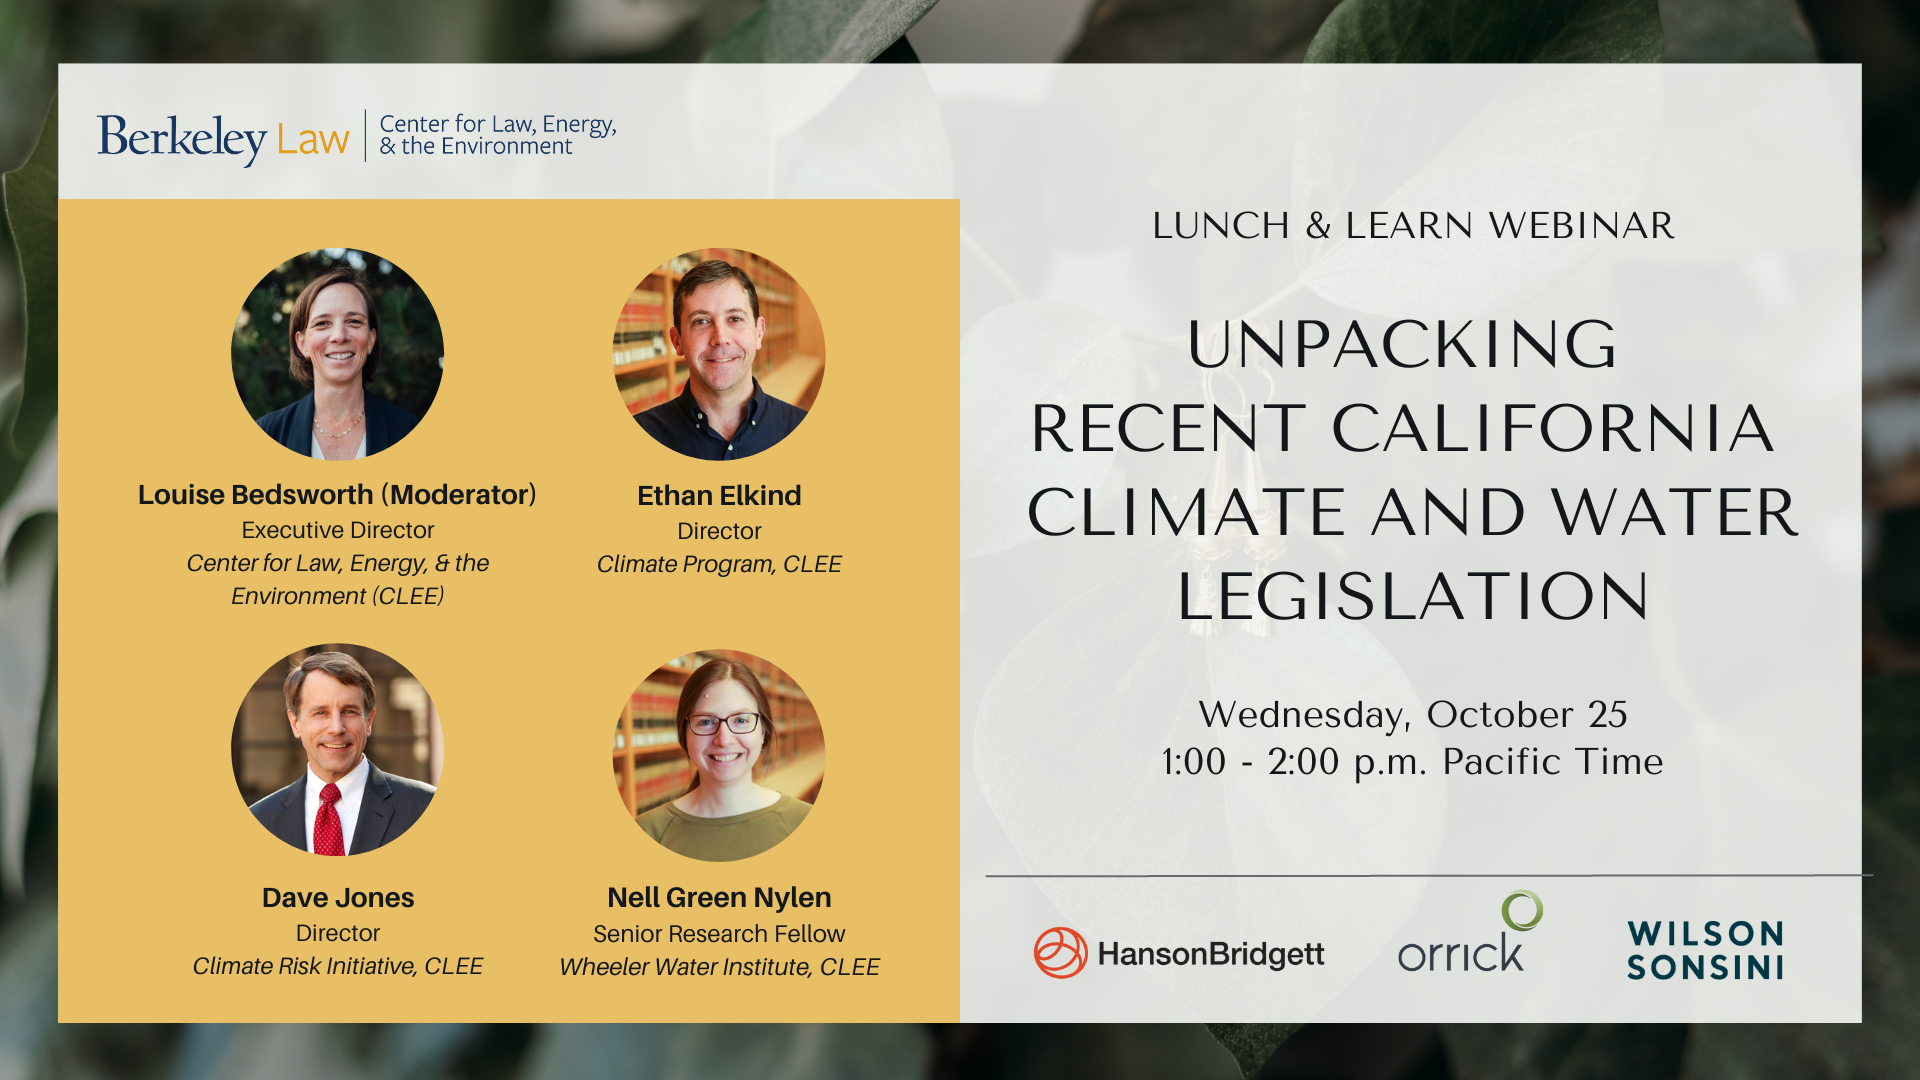 Flyer that says "Lunch & Learn Webinar Unpacking Recent California Climate and Water Legislation" with our photos of our panelists.